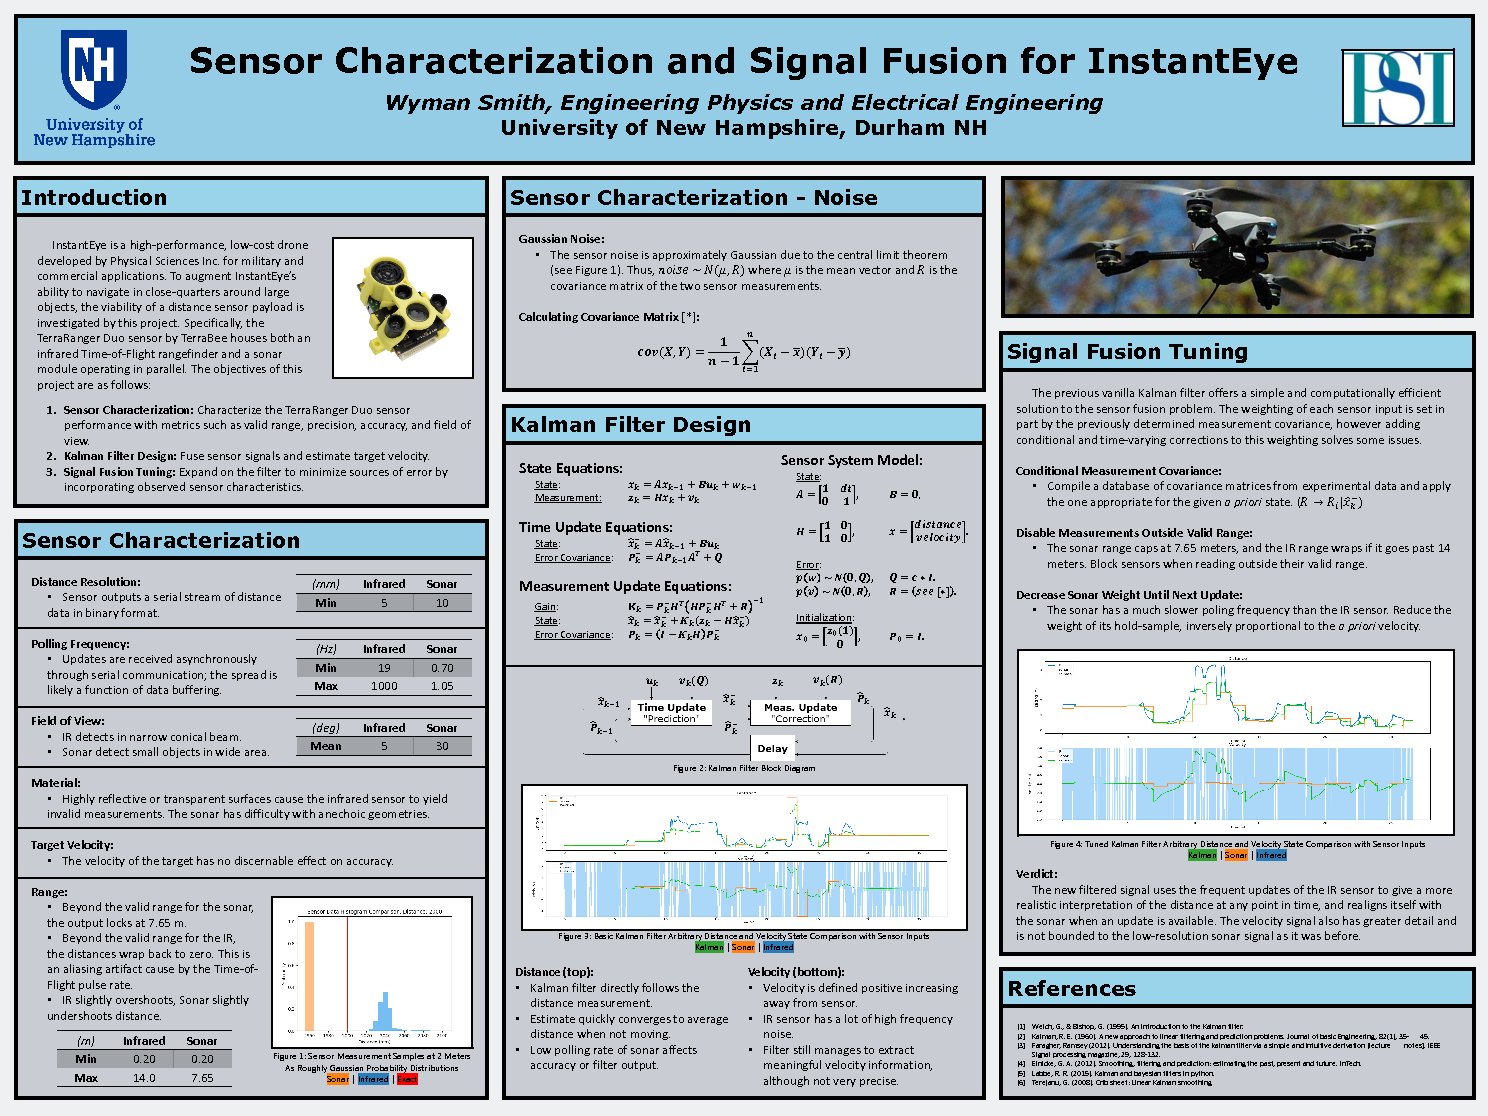 Sensor Characterization And Signal Fusion For Instanteye by wts5